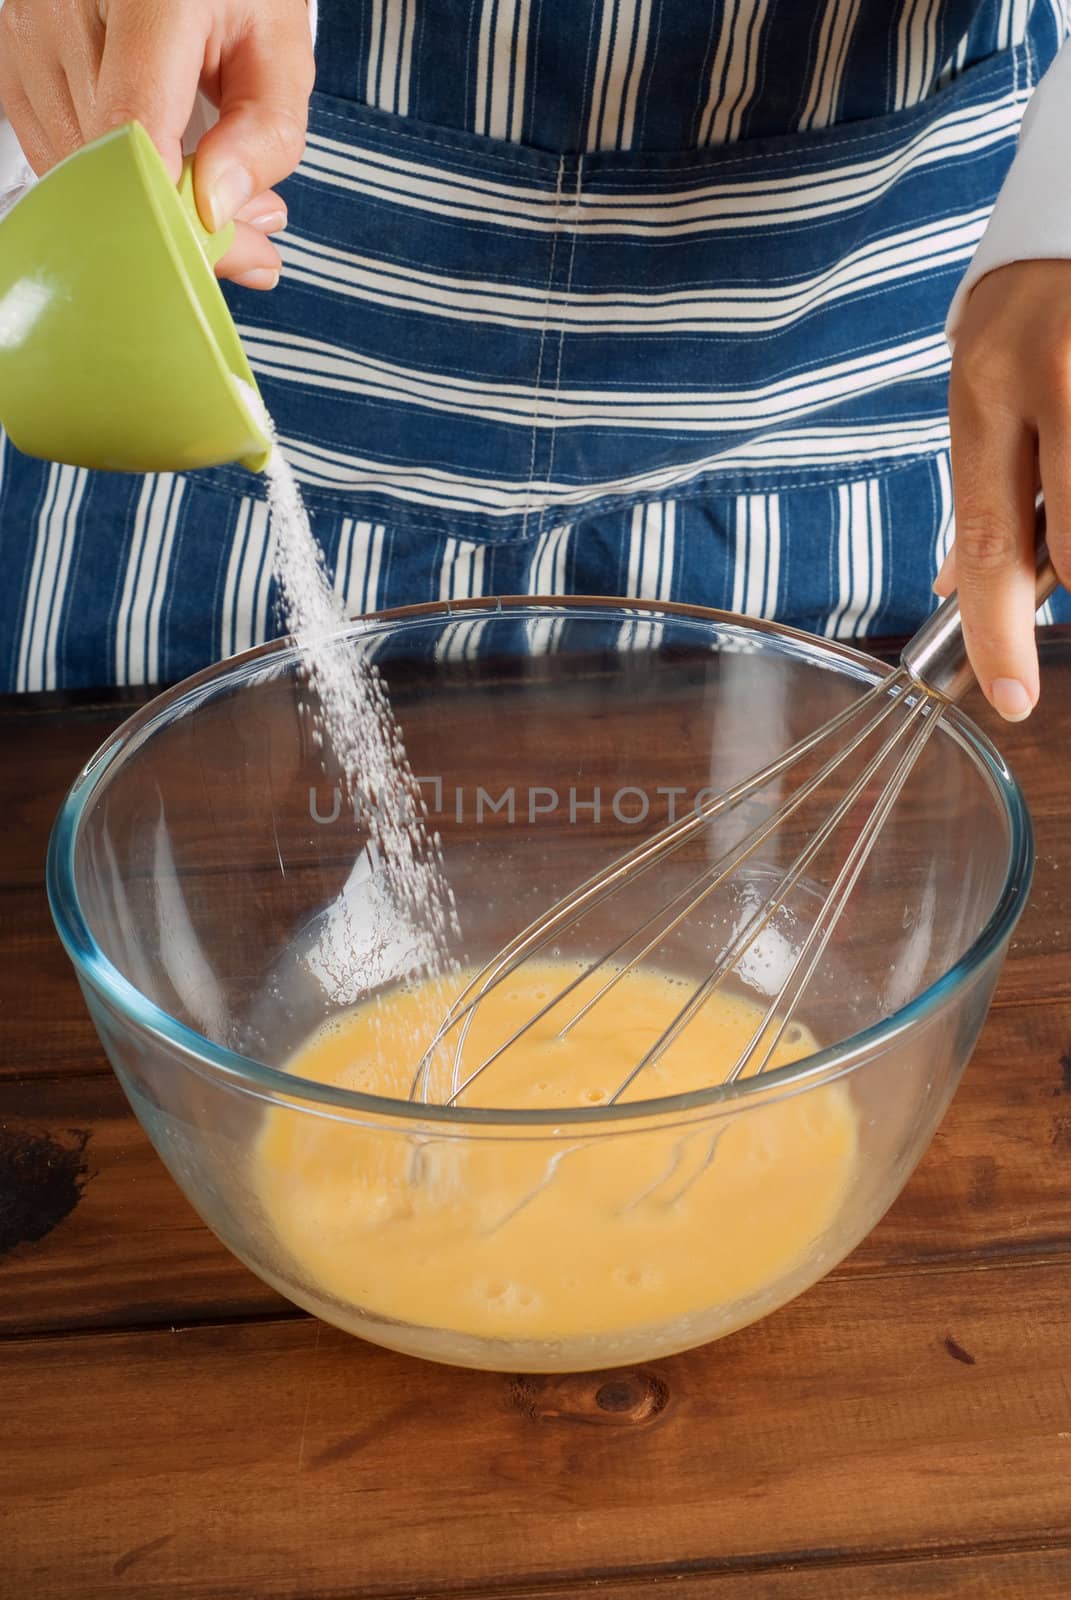 Woman chef cooking or baking and pouring sugar into pancake mixture batter